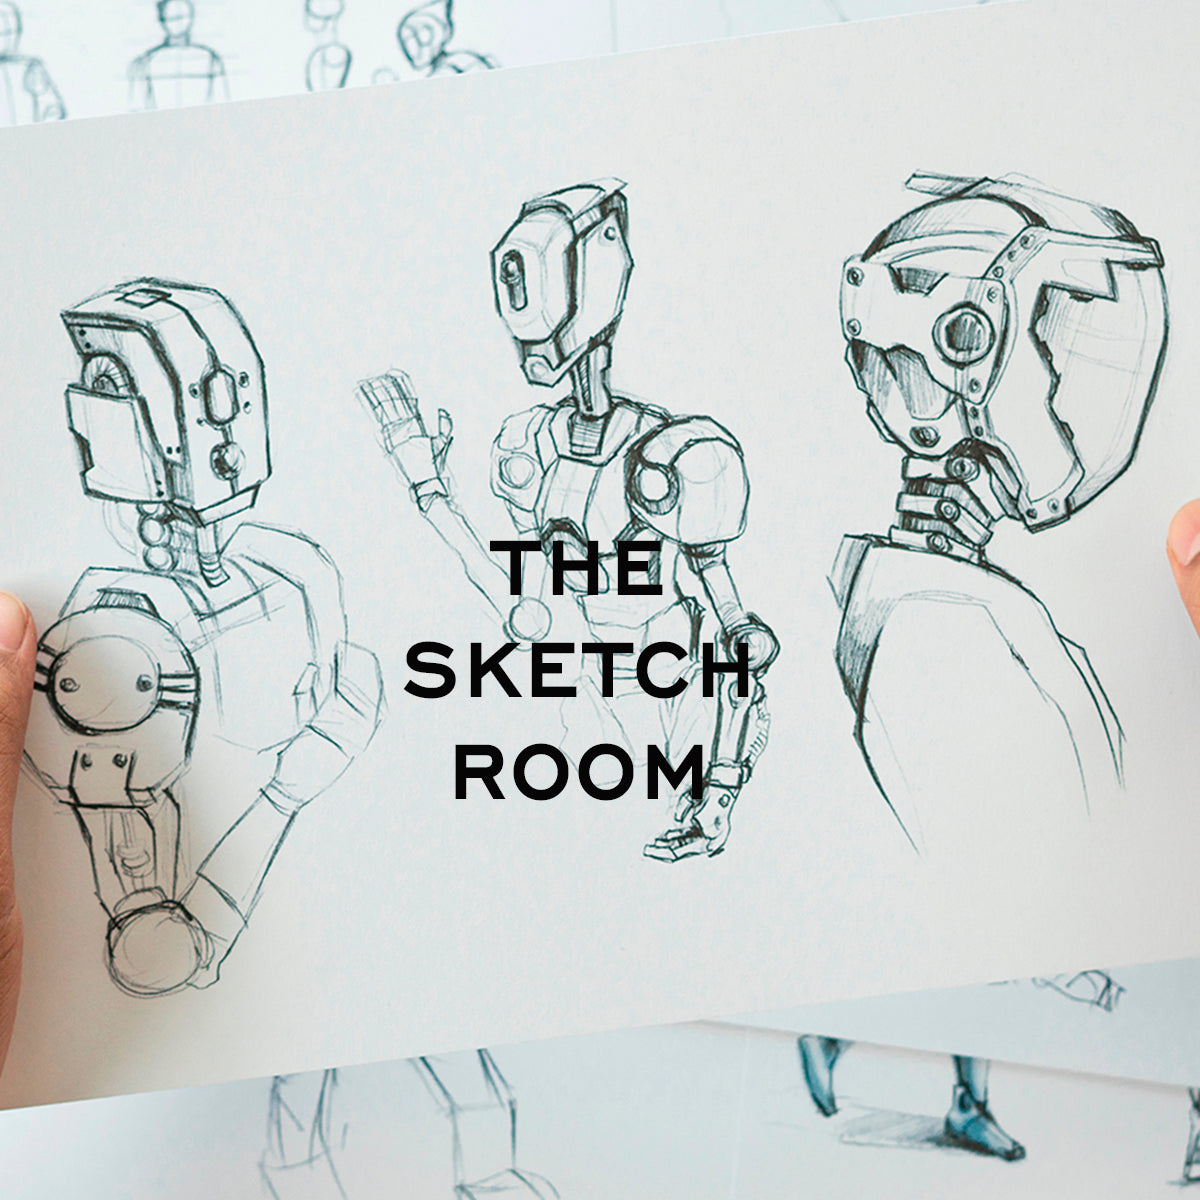 The Sketch Room